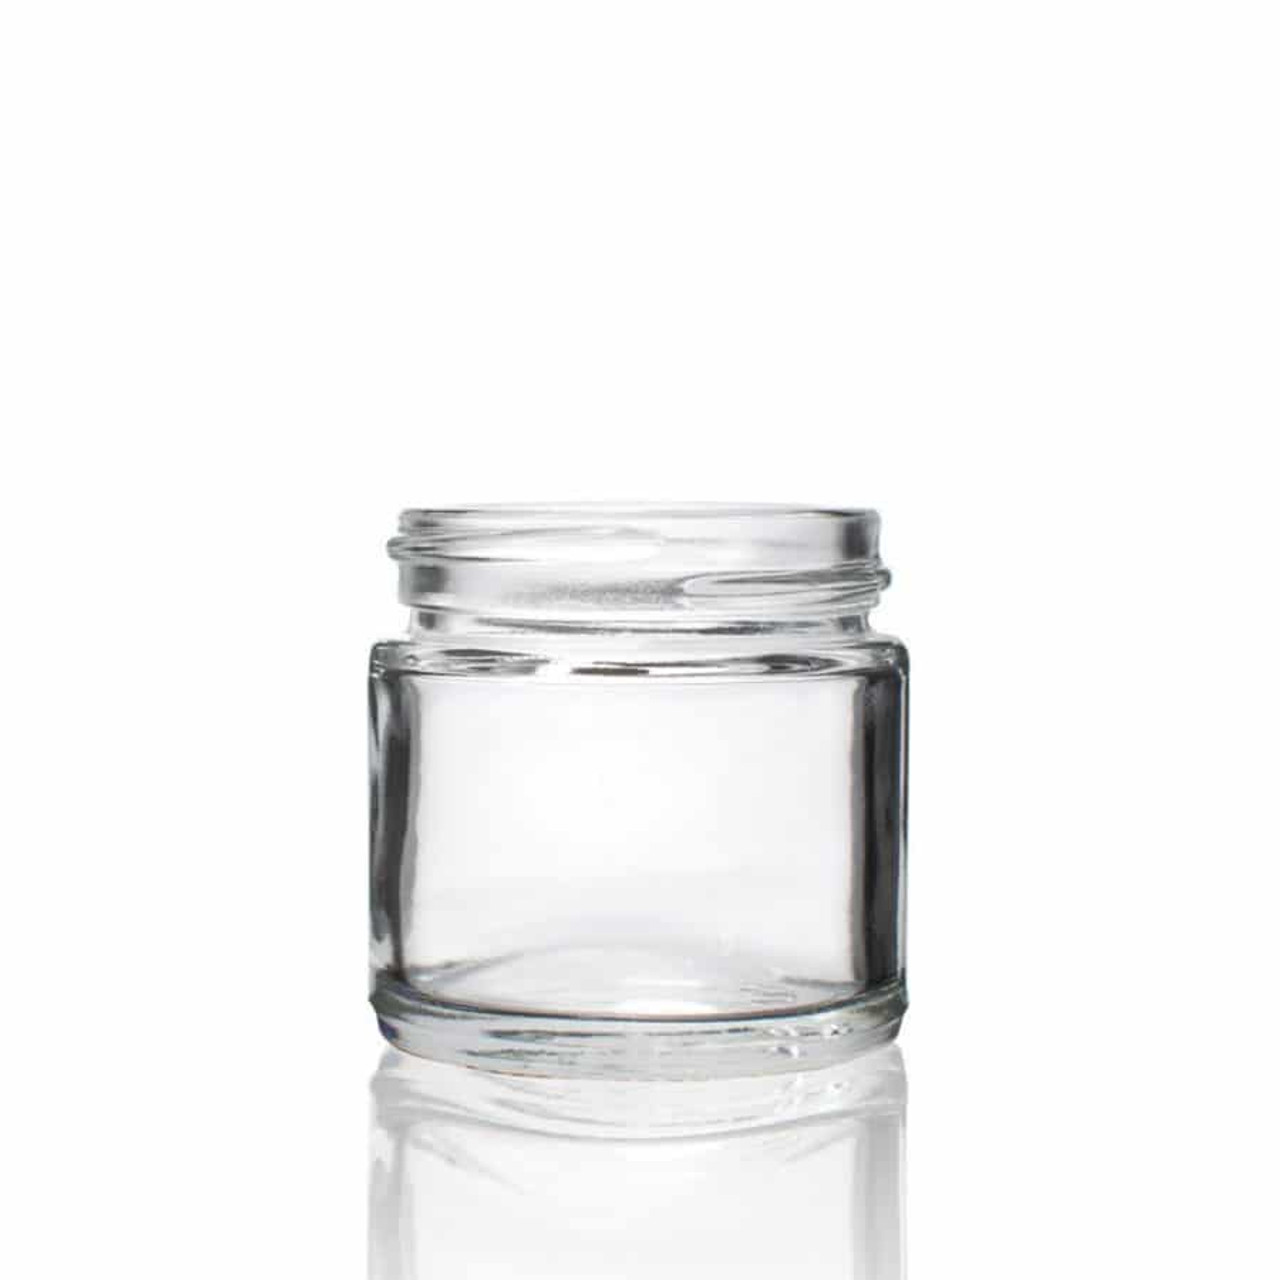 https://cdn11.bigcommerce.com/s-w60s75xh/images/stencil/1280x1280/products/6758/33101/1-oz-43-400-Clear-Glass-Straight-Sided-Round-Jar__14361.1642018037.jpg?c=2